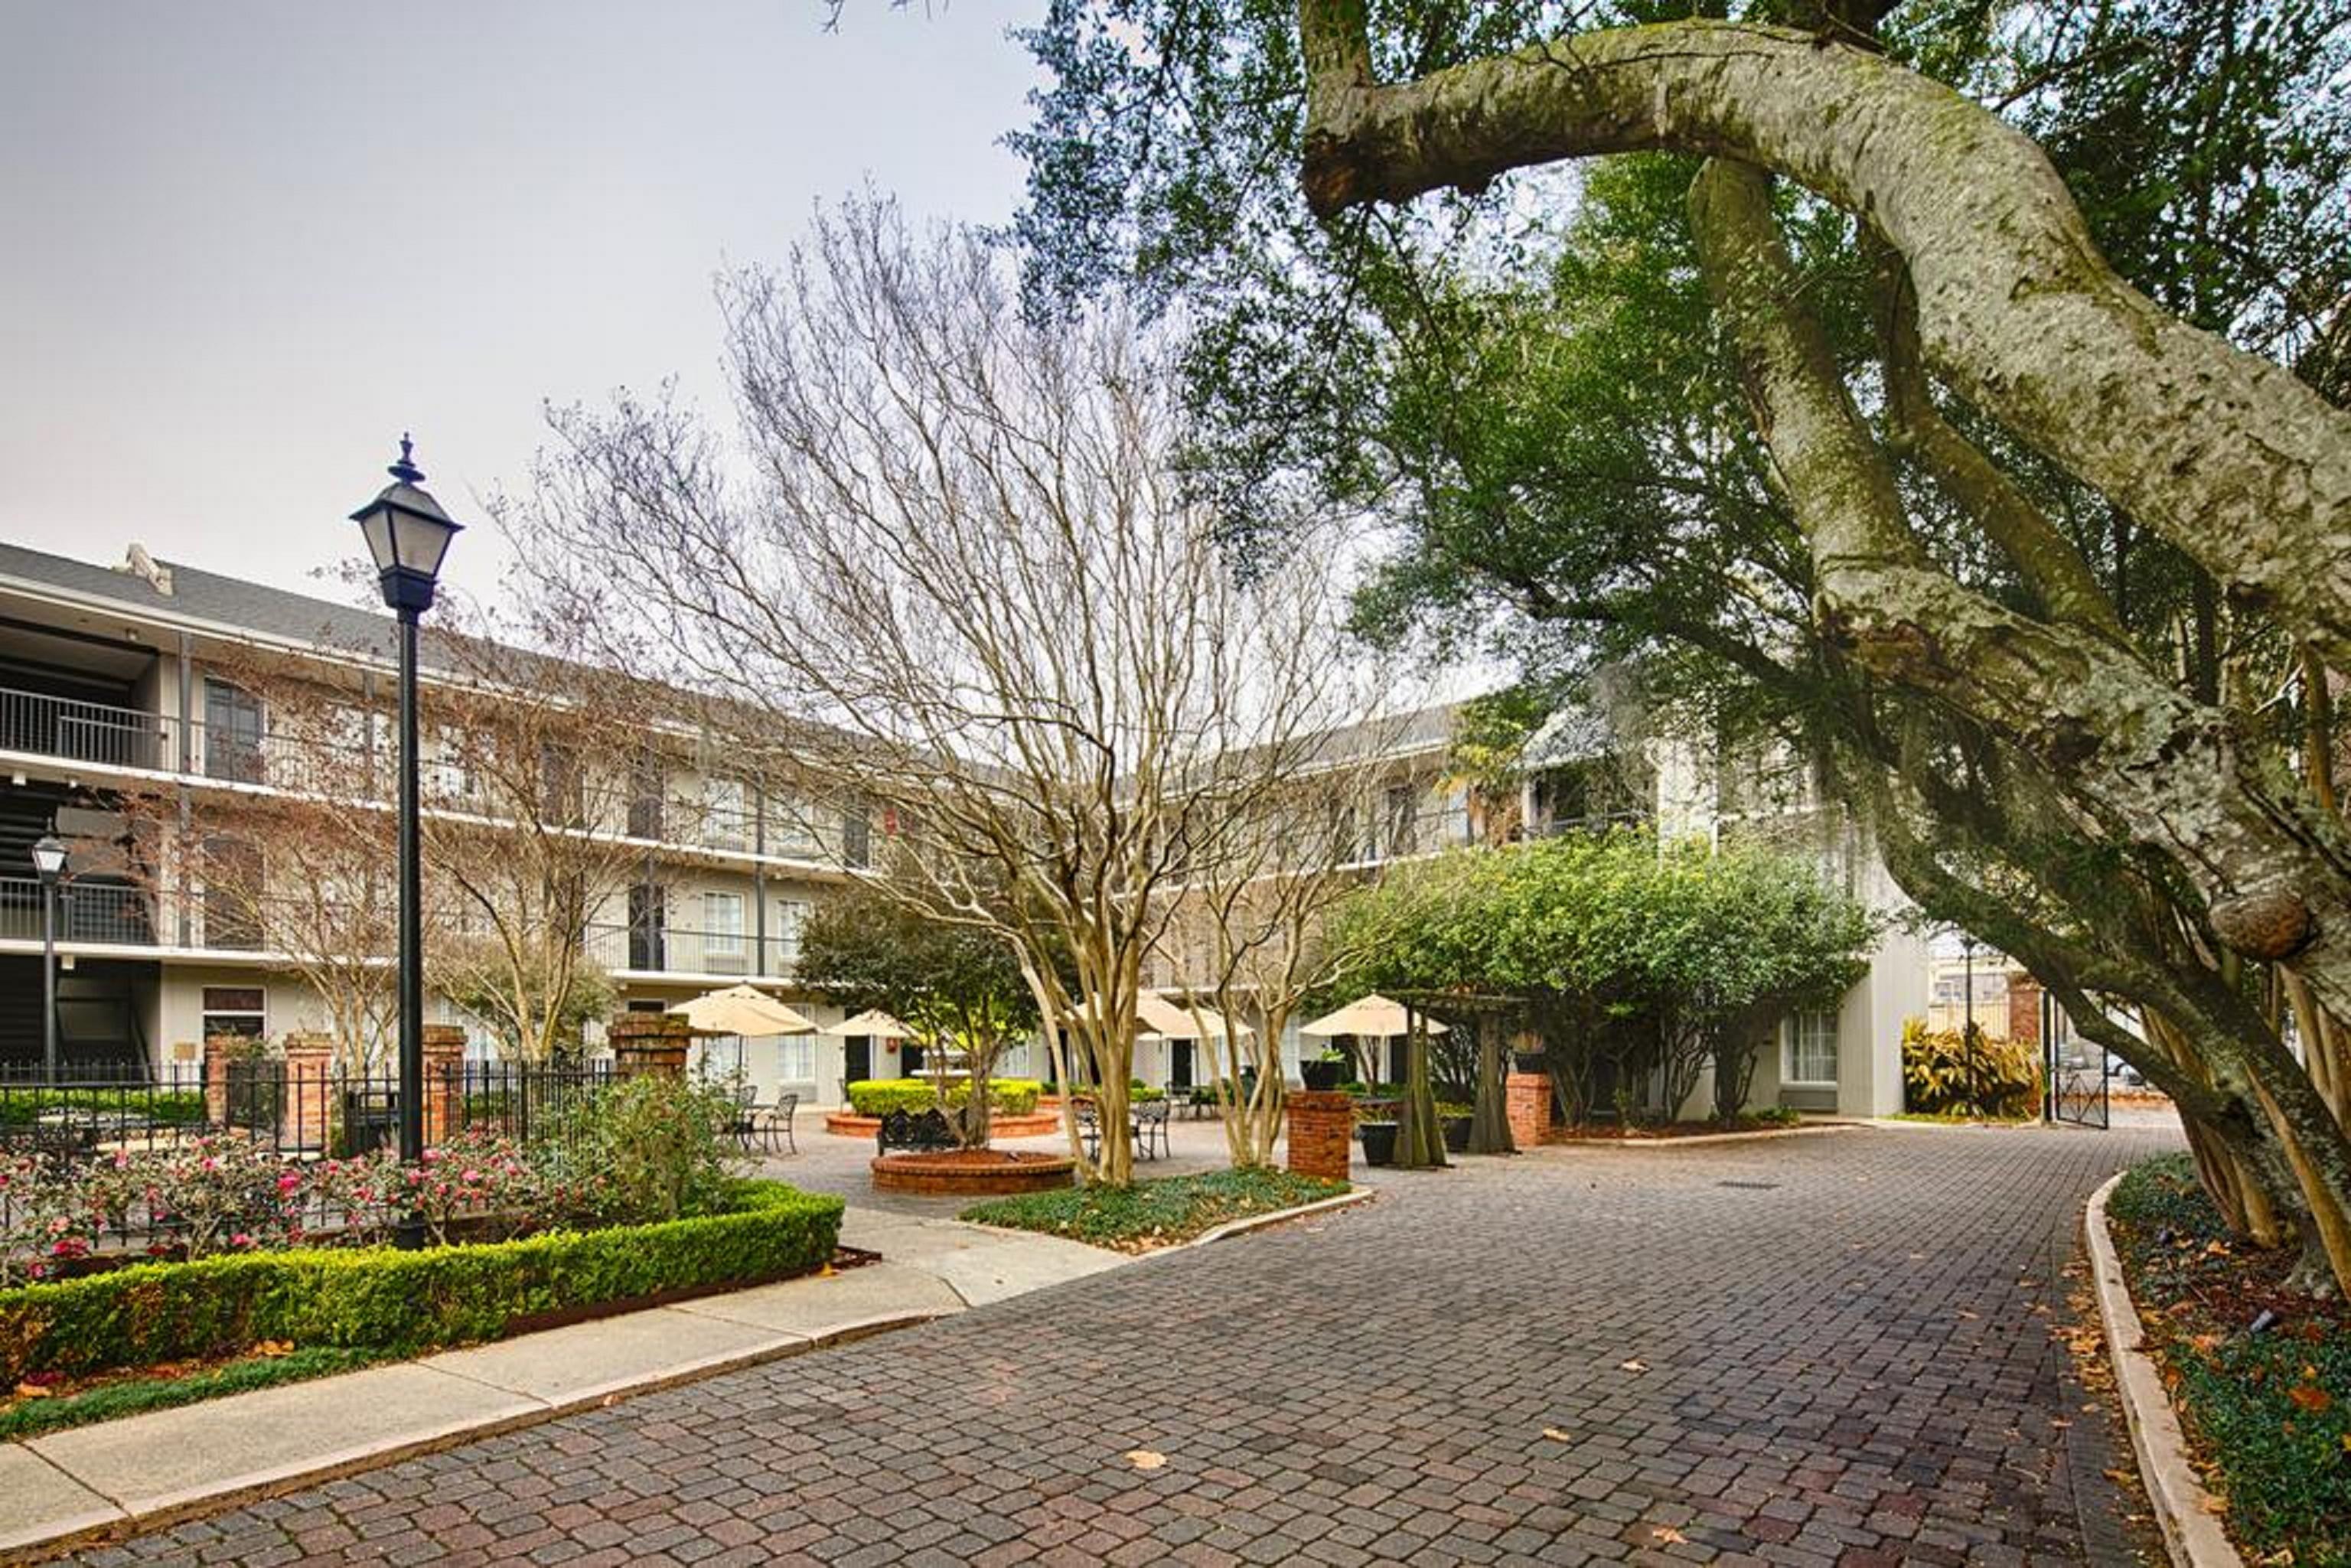 Maison Saint Charles By Hotel Rl New Orleans Exterior foto